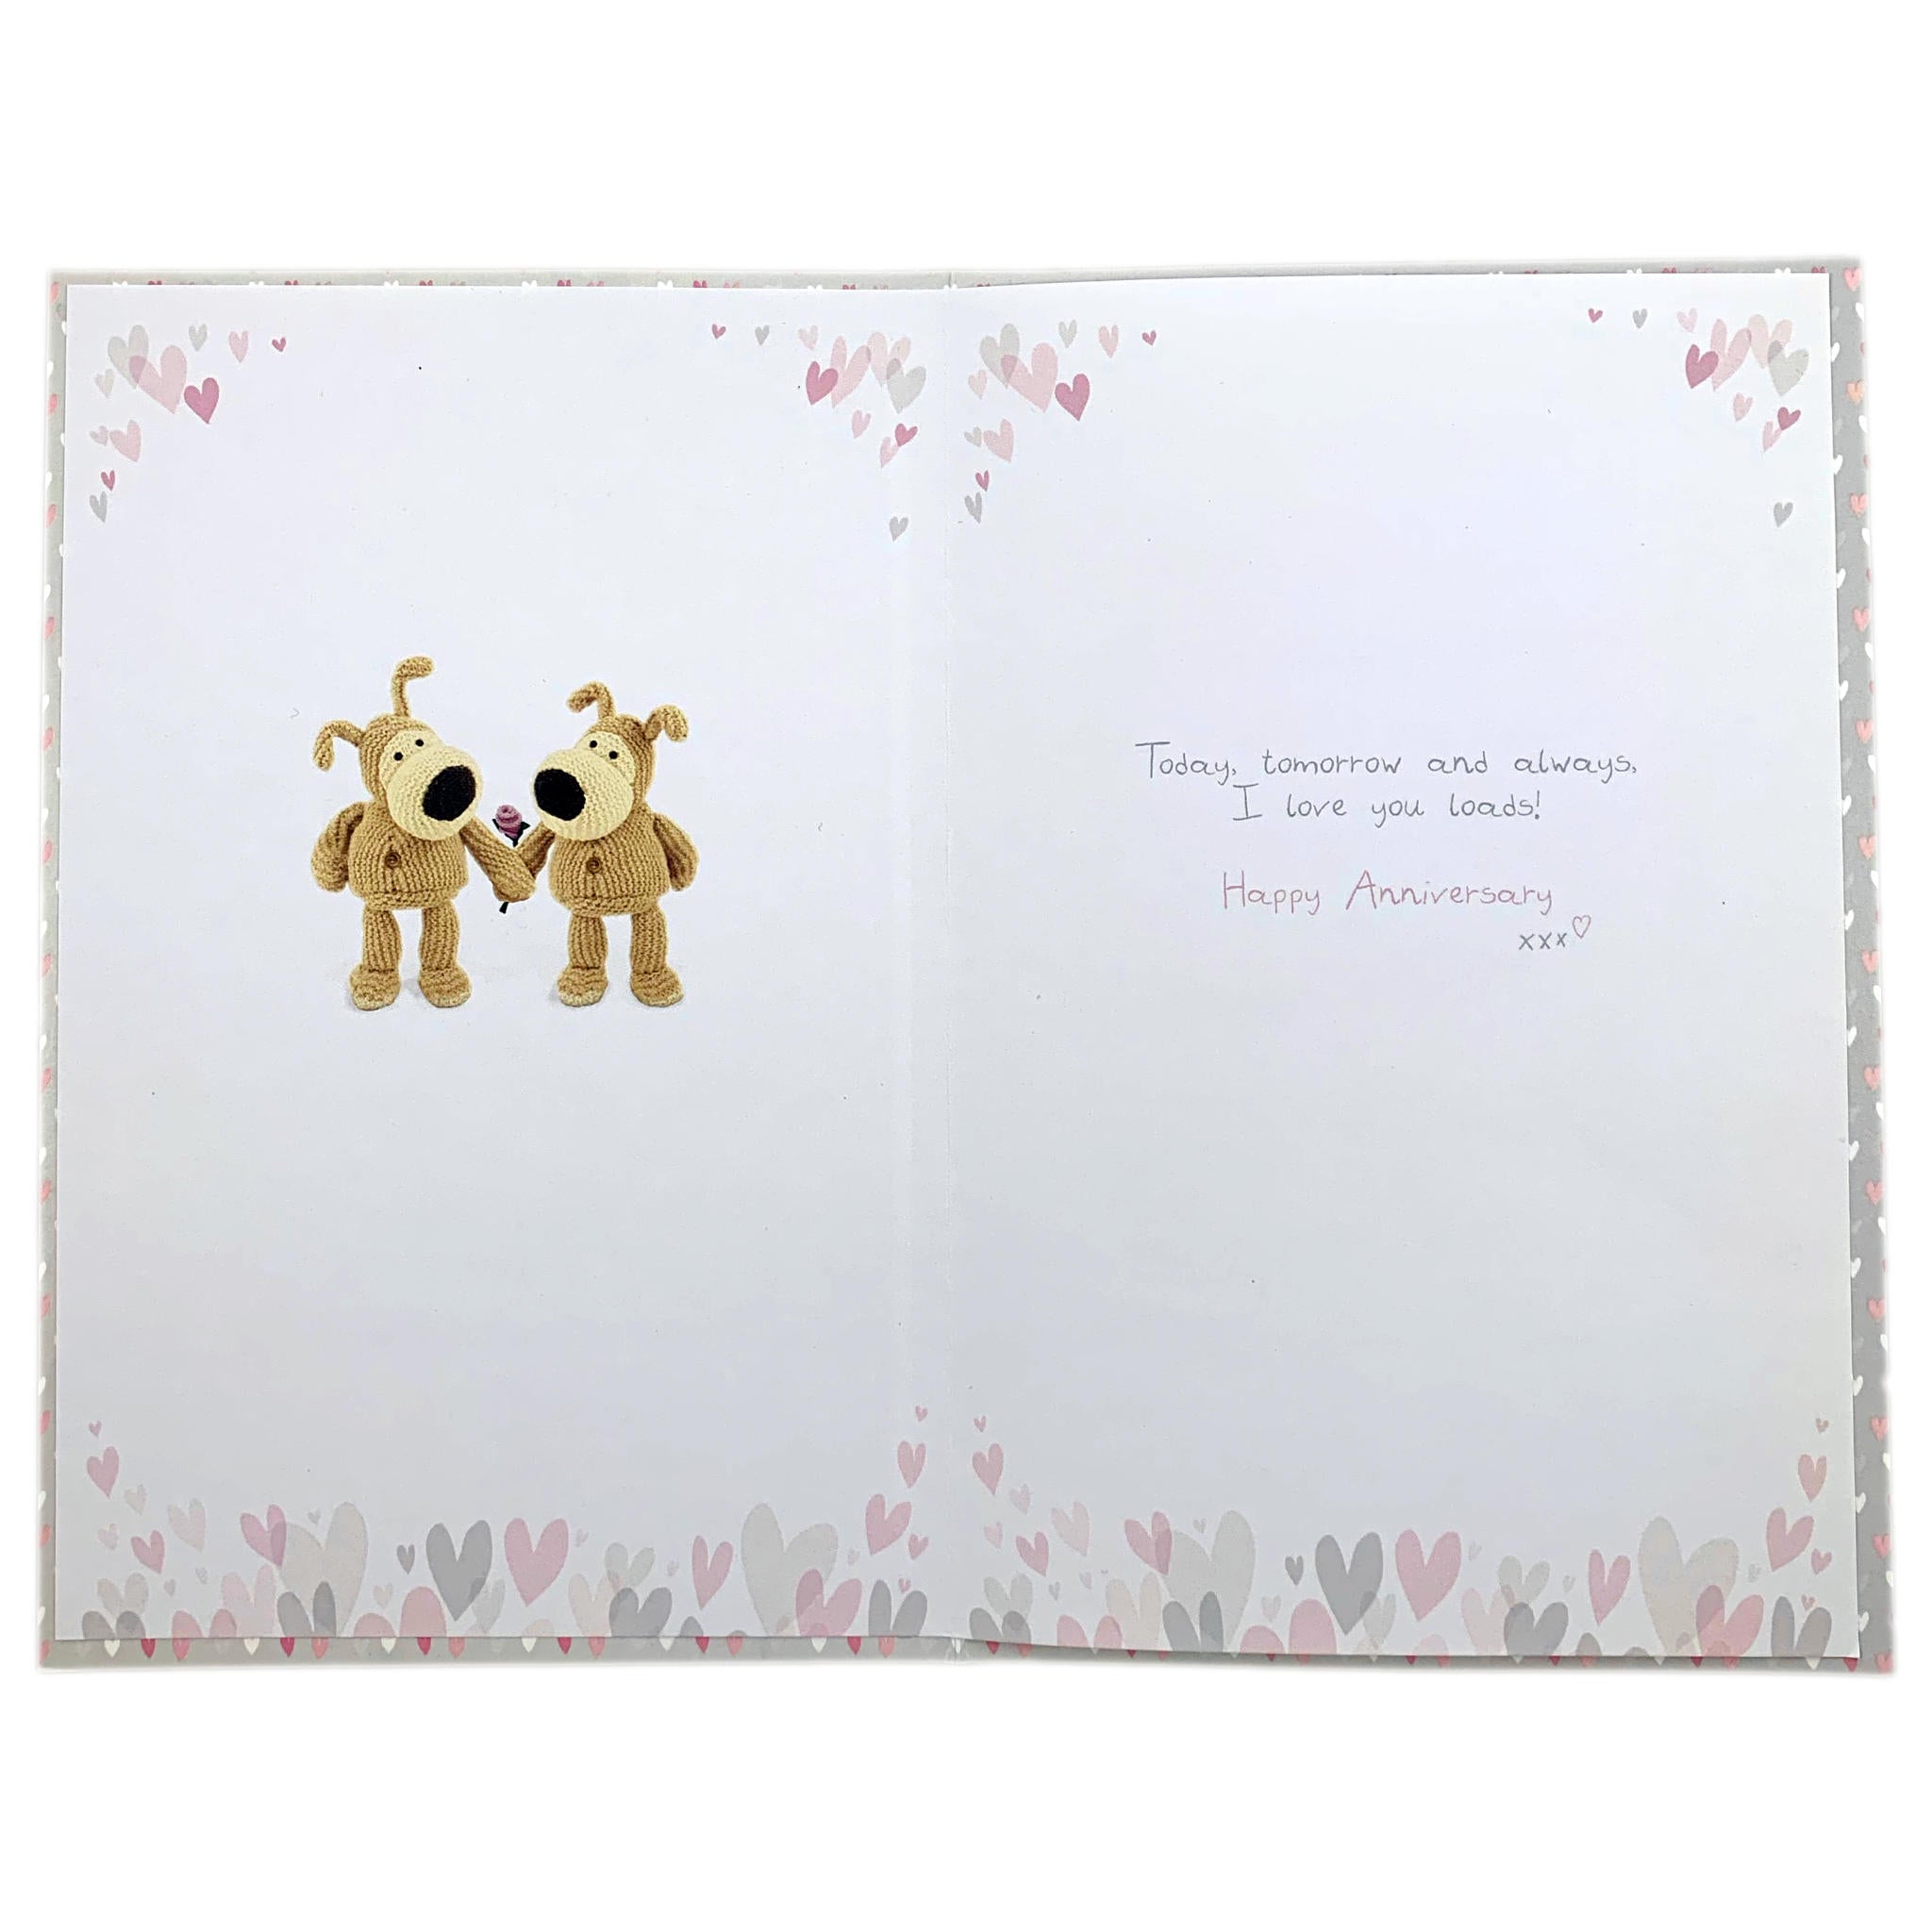 Inside of Anniversary Wife Boofle with Rose Greetings Card